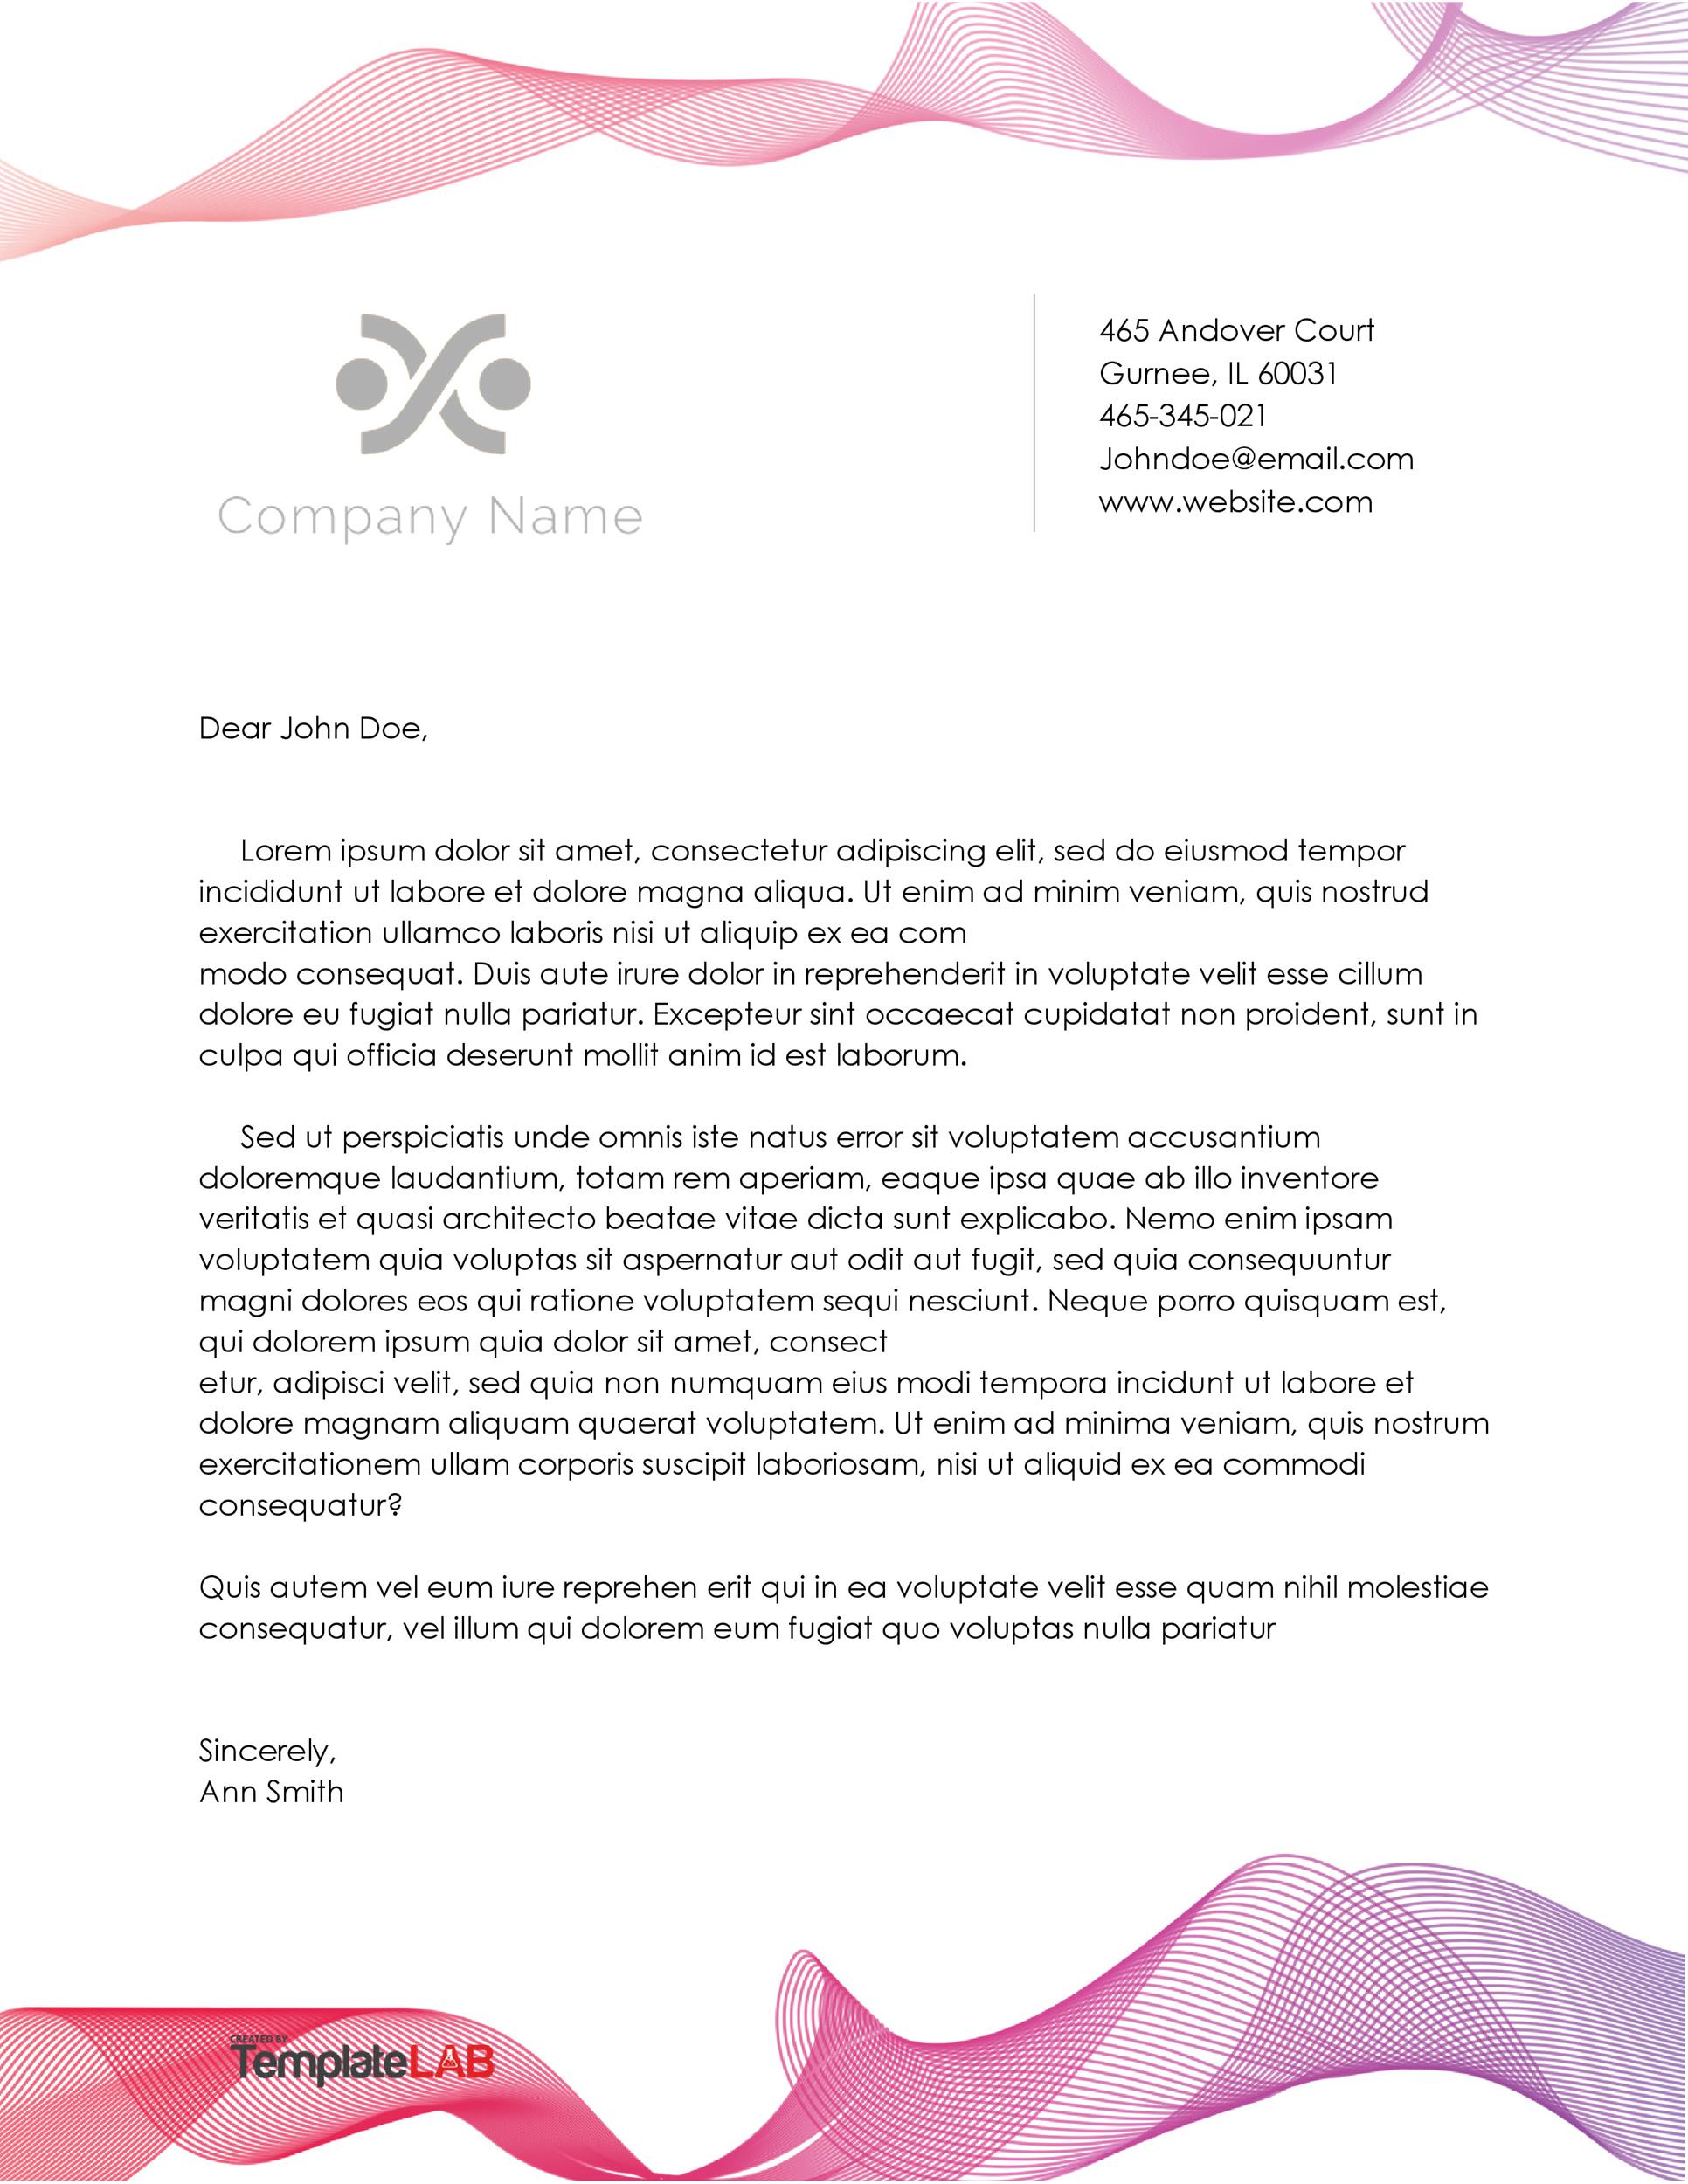 6-microsoft-word-business-letter-template-teplates-for-within